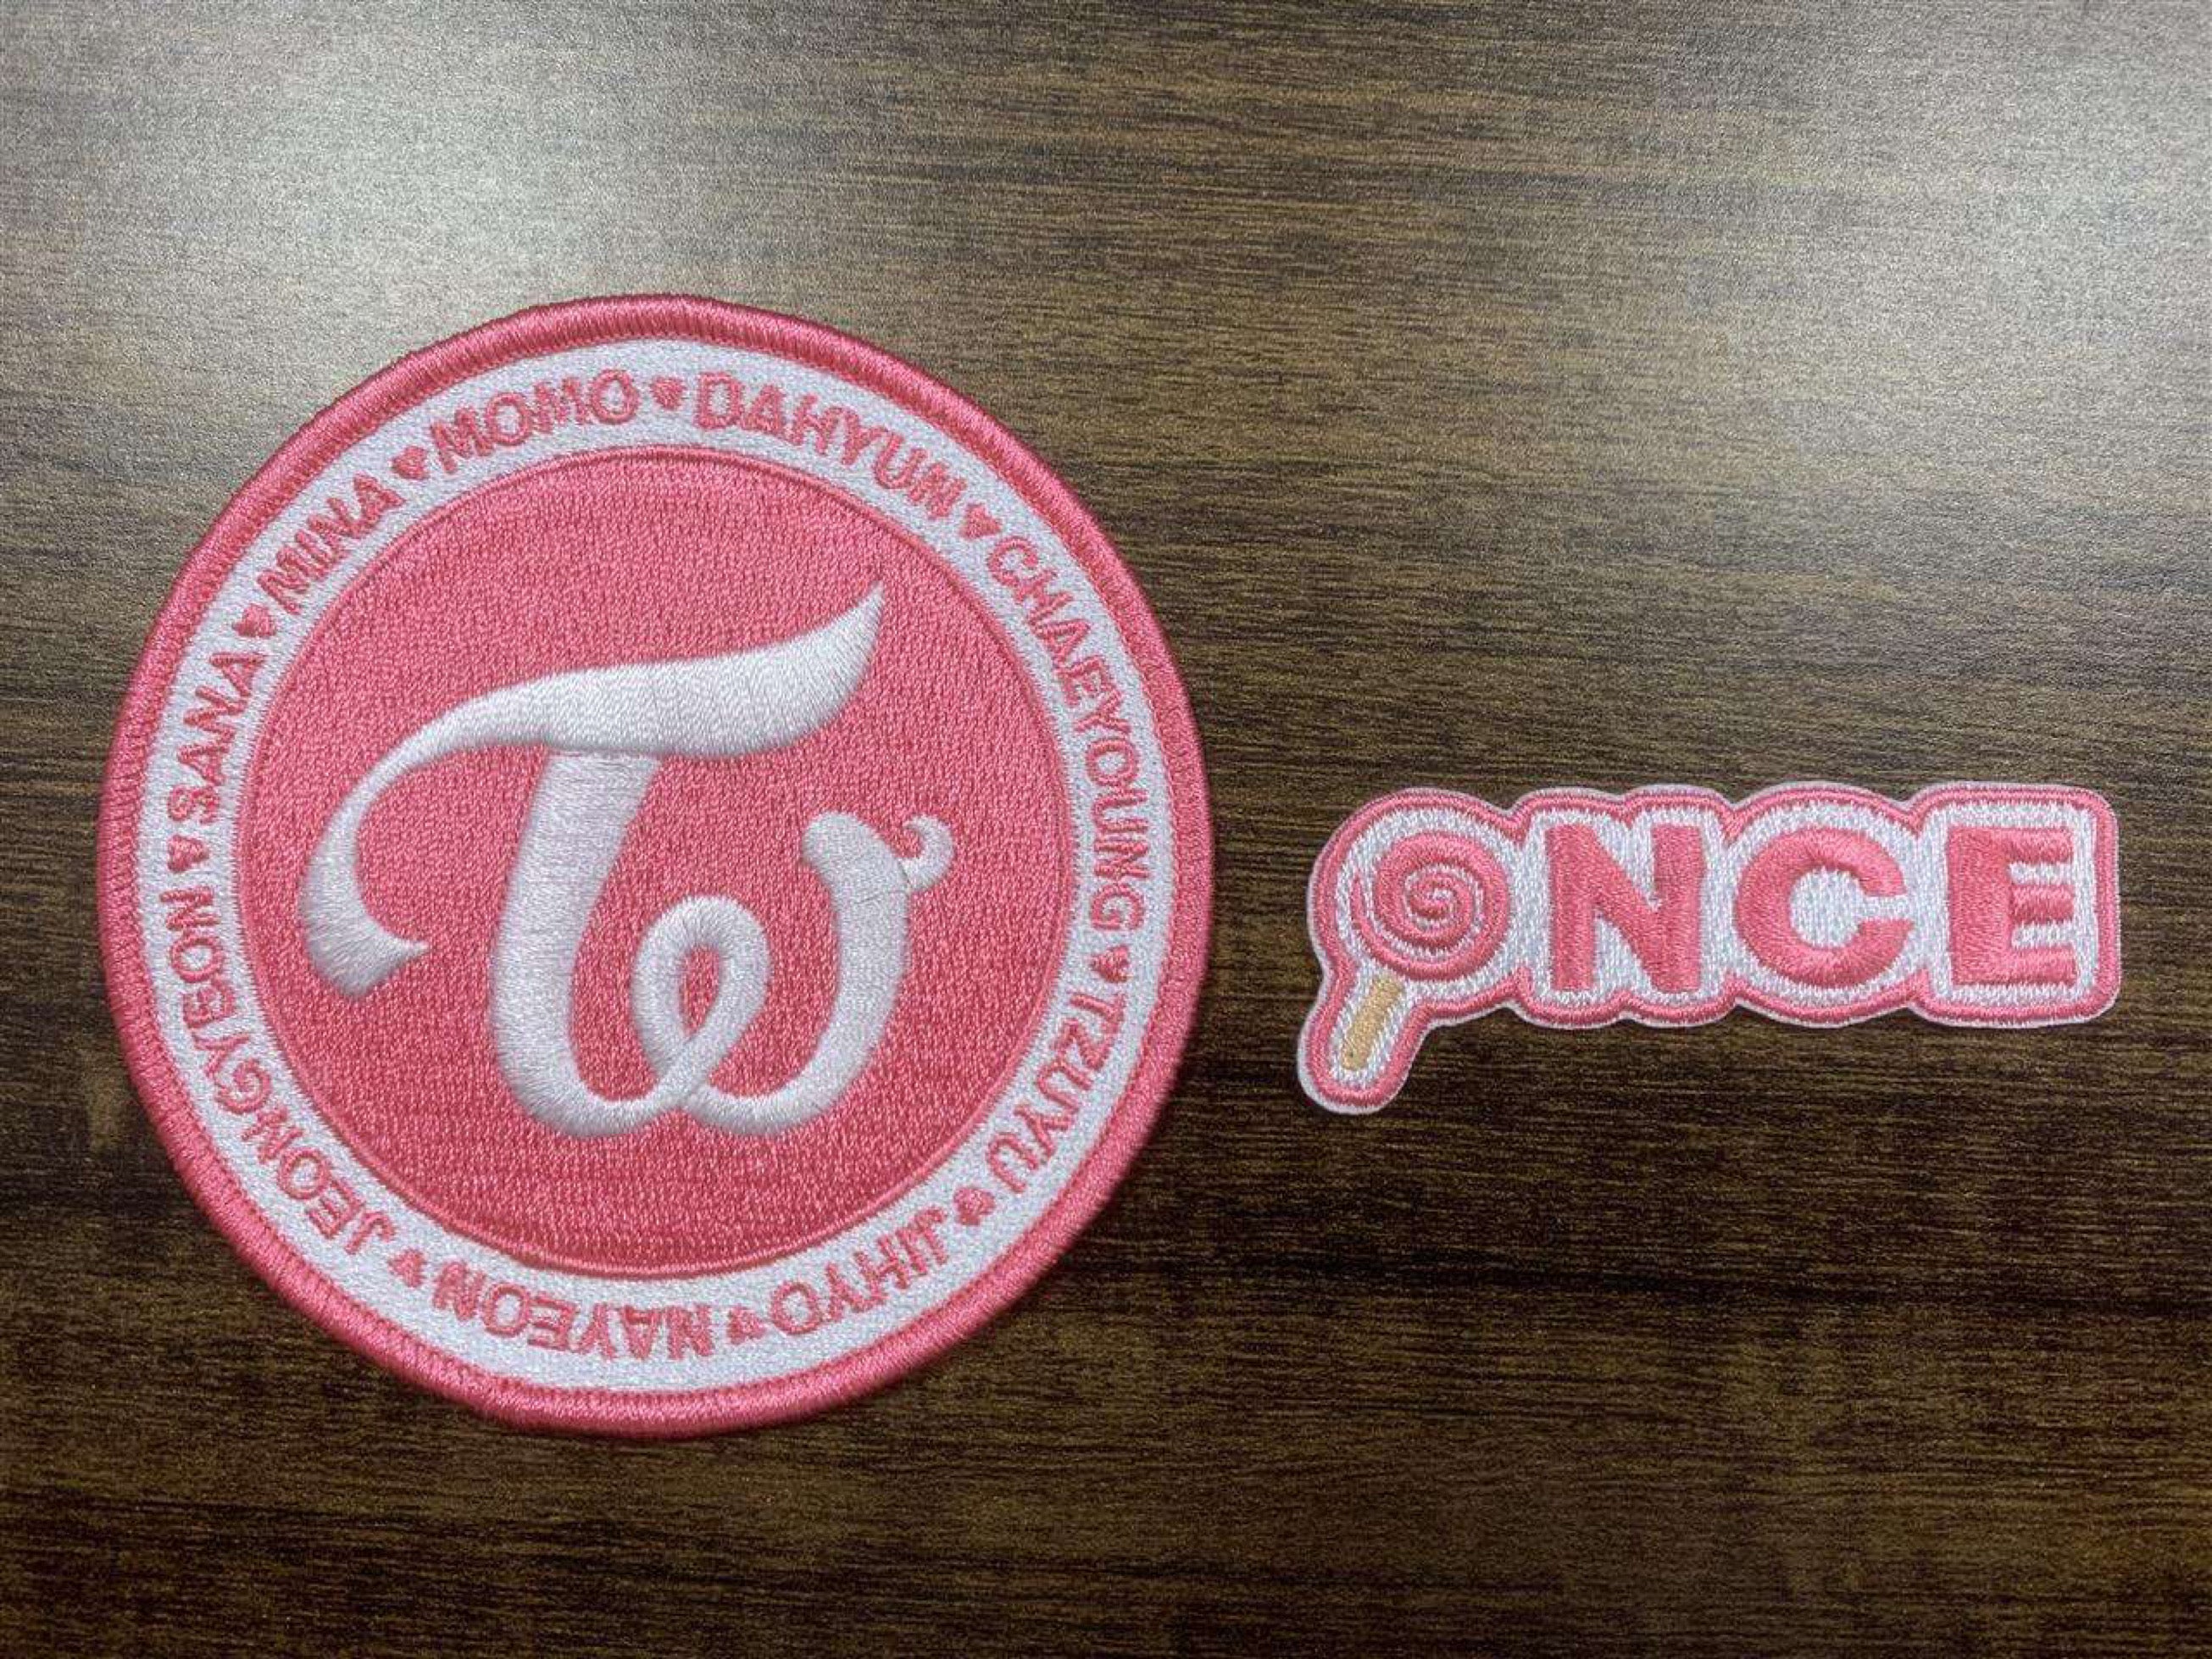 Twice Patches